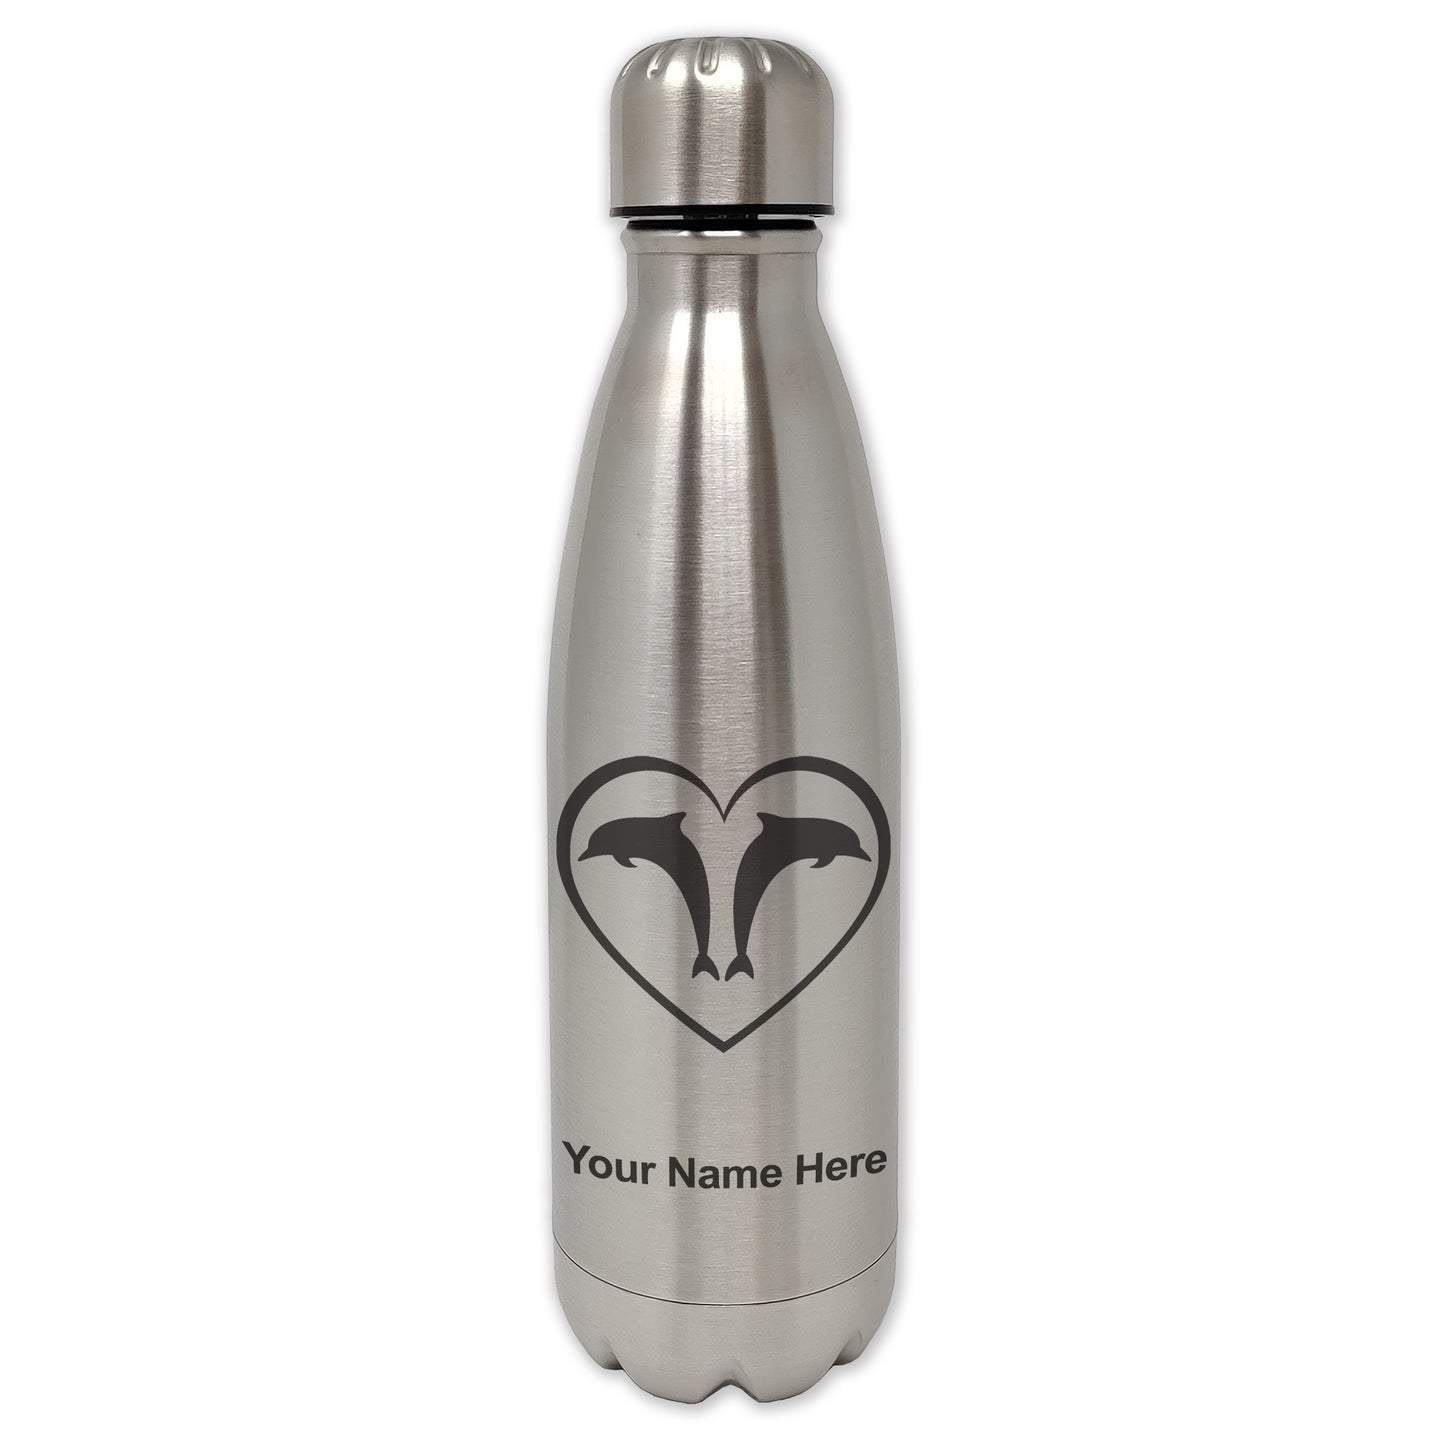 LaserGram Single Wall Water Bottle, Dolphin Heart, Personalized Engraving Included